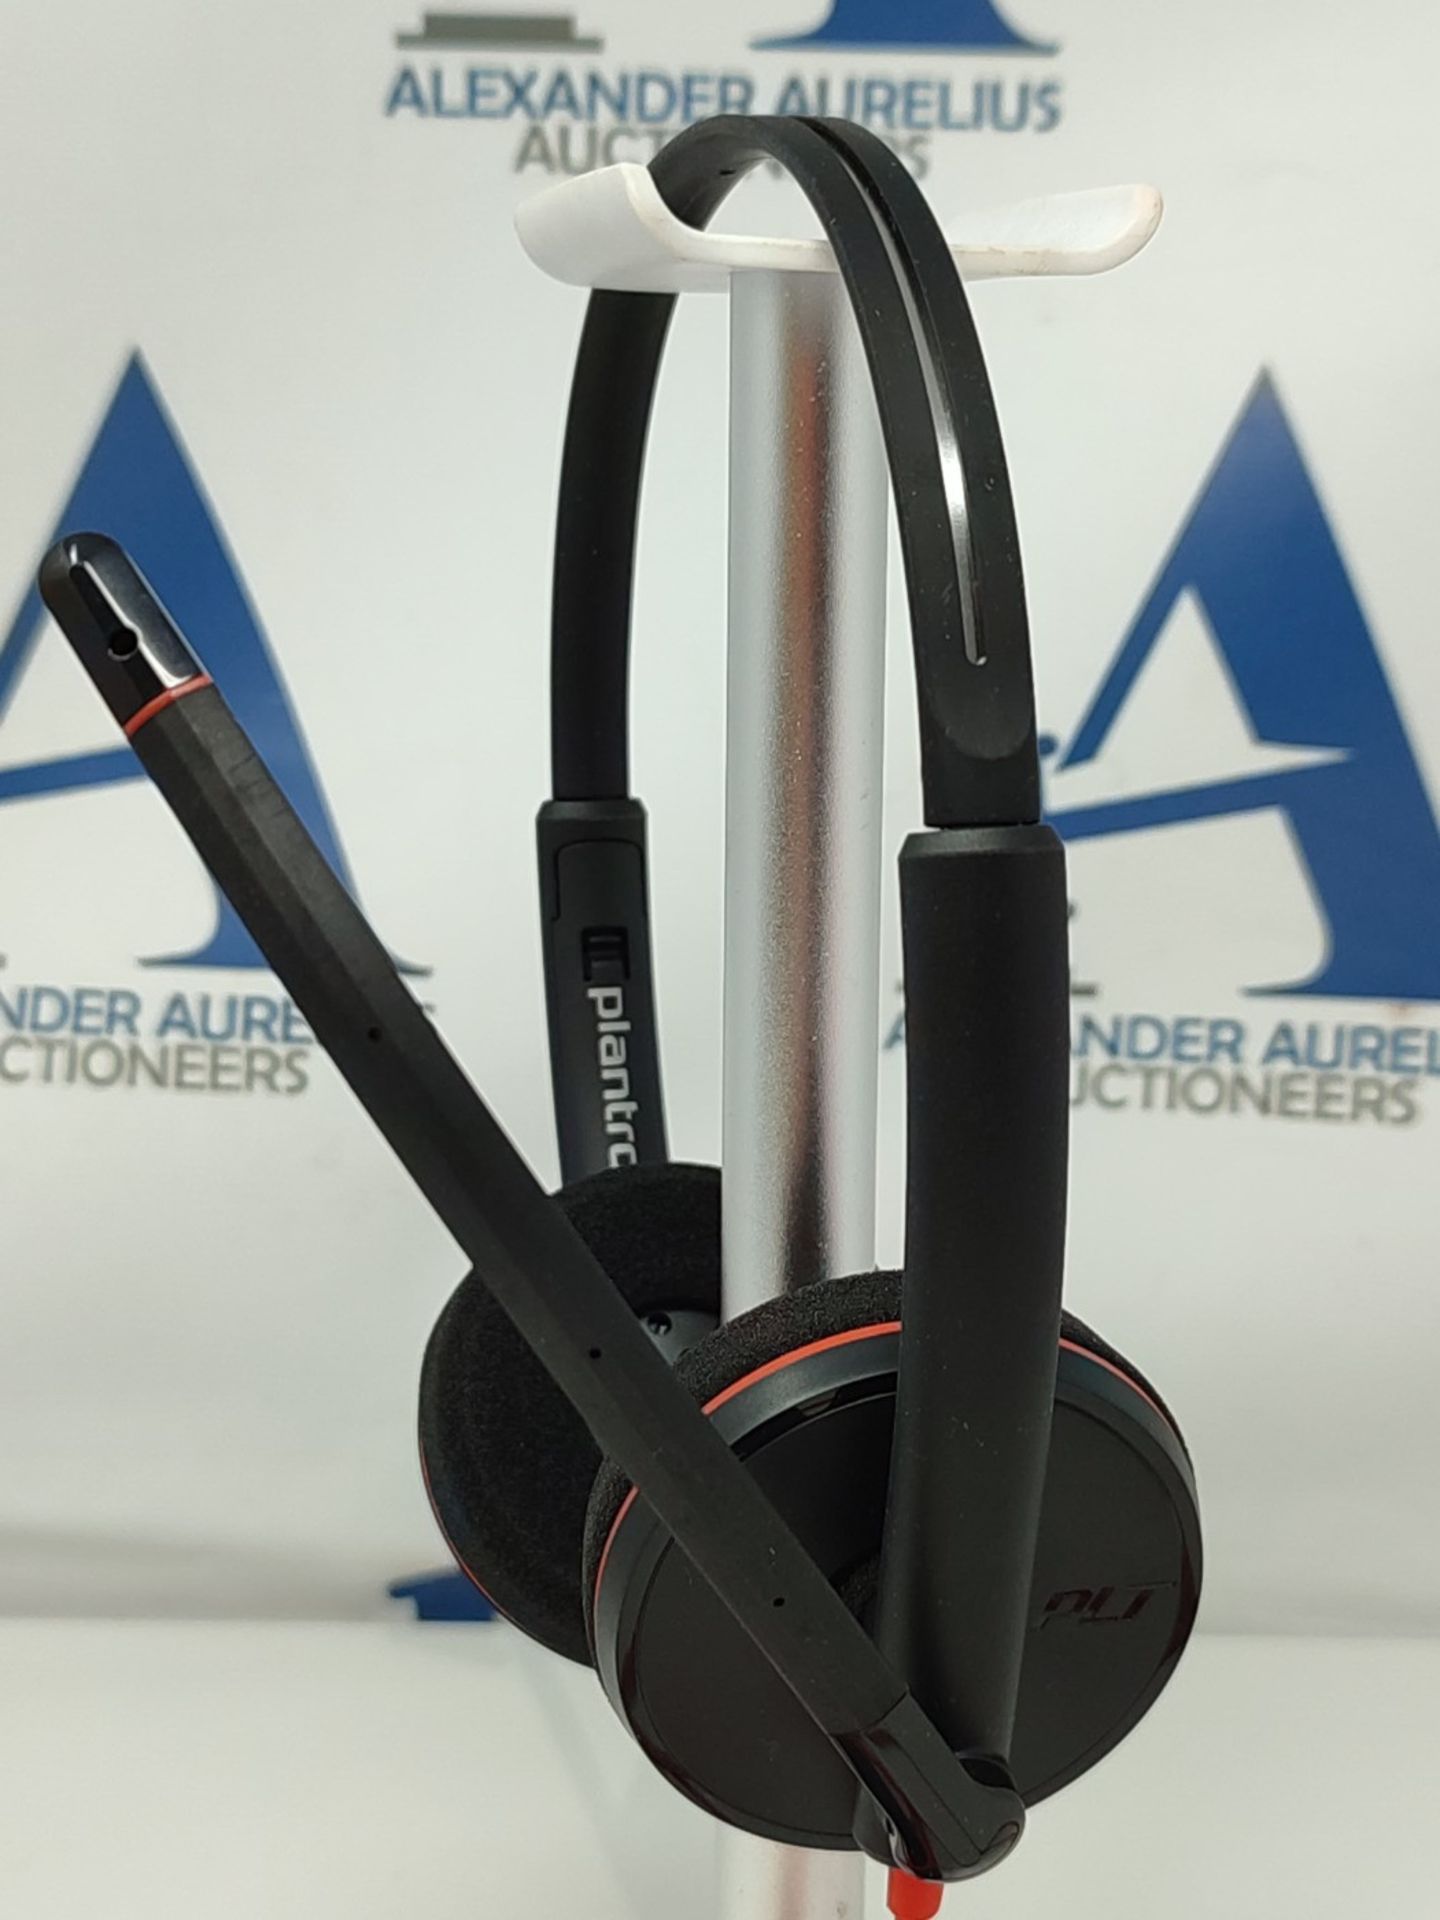 Plantronics - Blackwire 3220 USB-A Wired Headset - Dual Ear (Stereo) with Boom Mic - C - Image 2 of 3